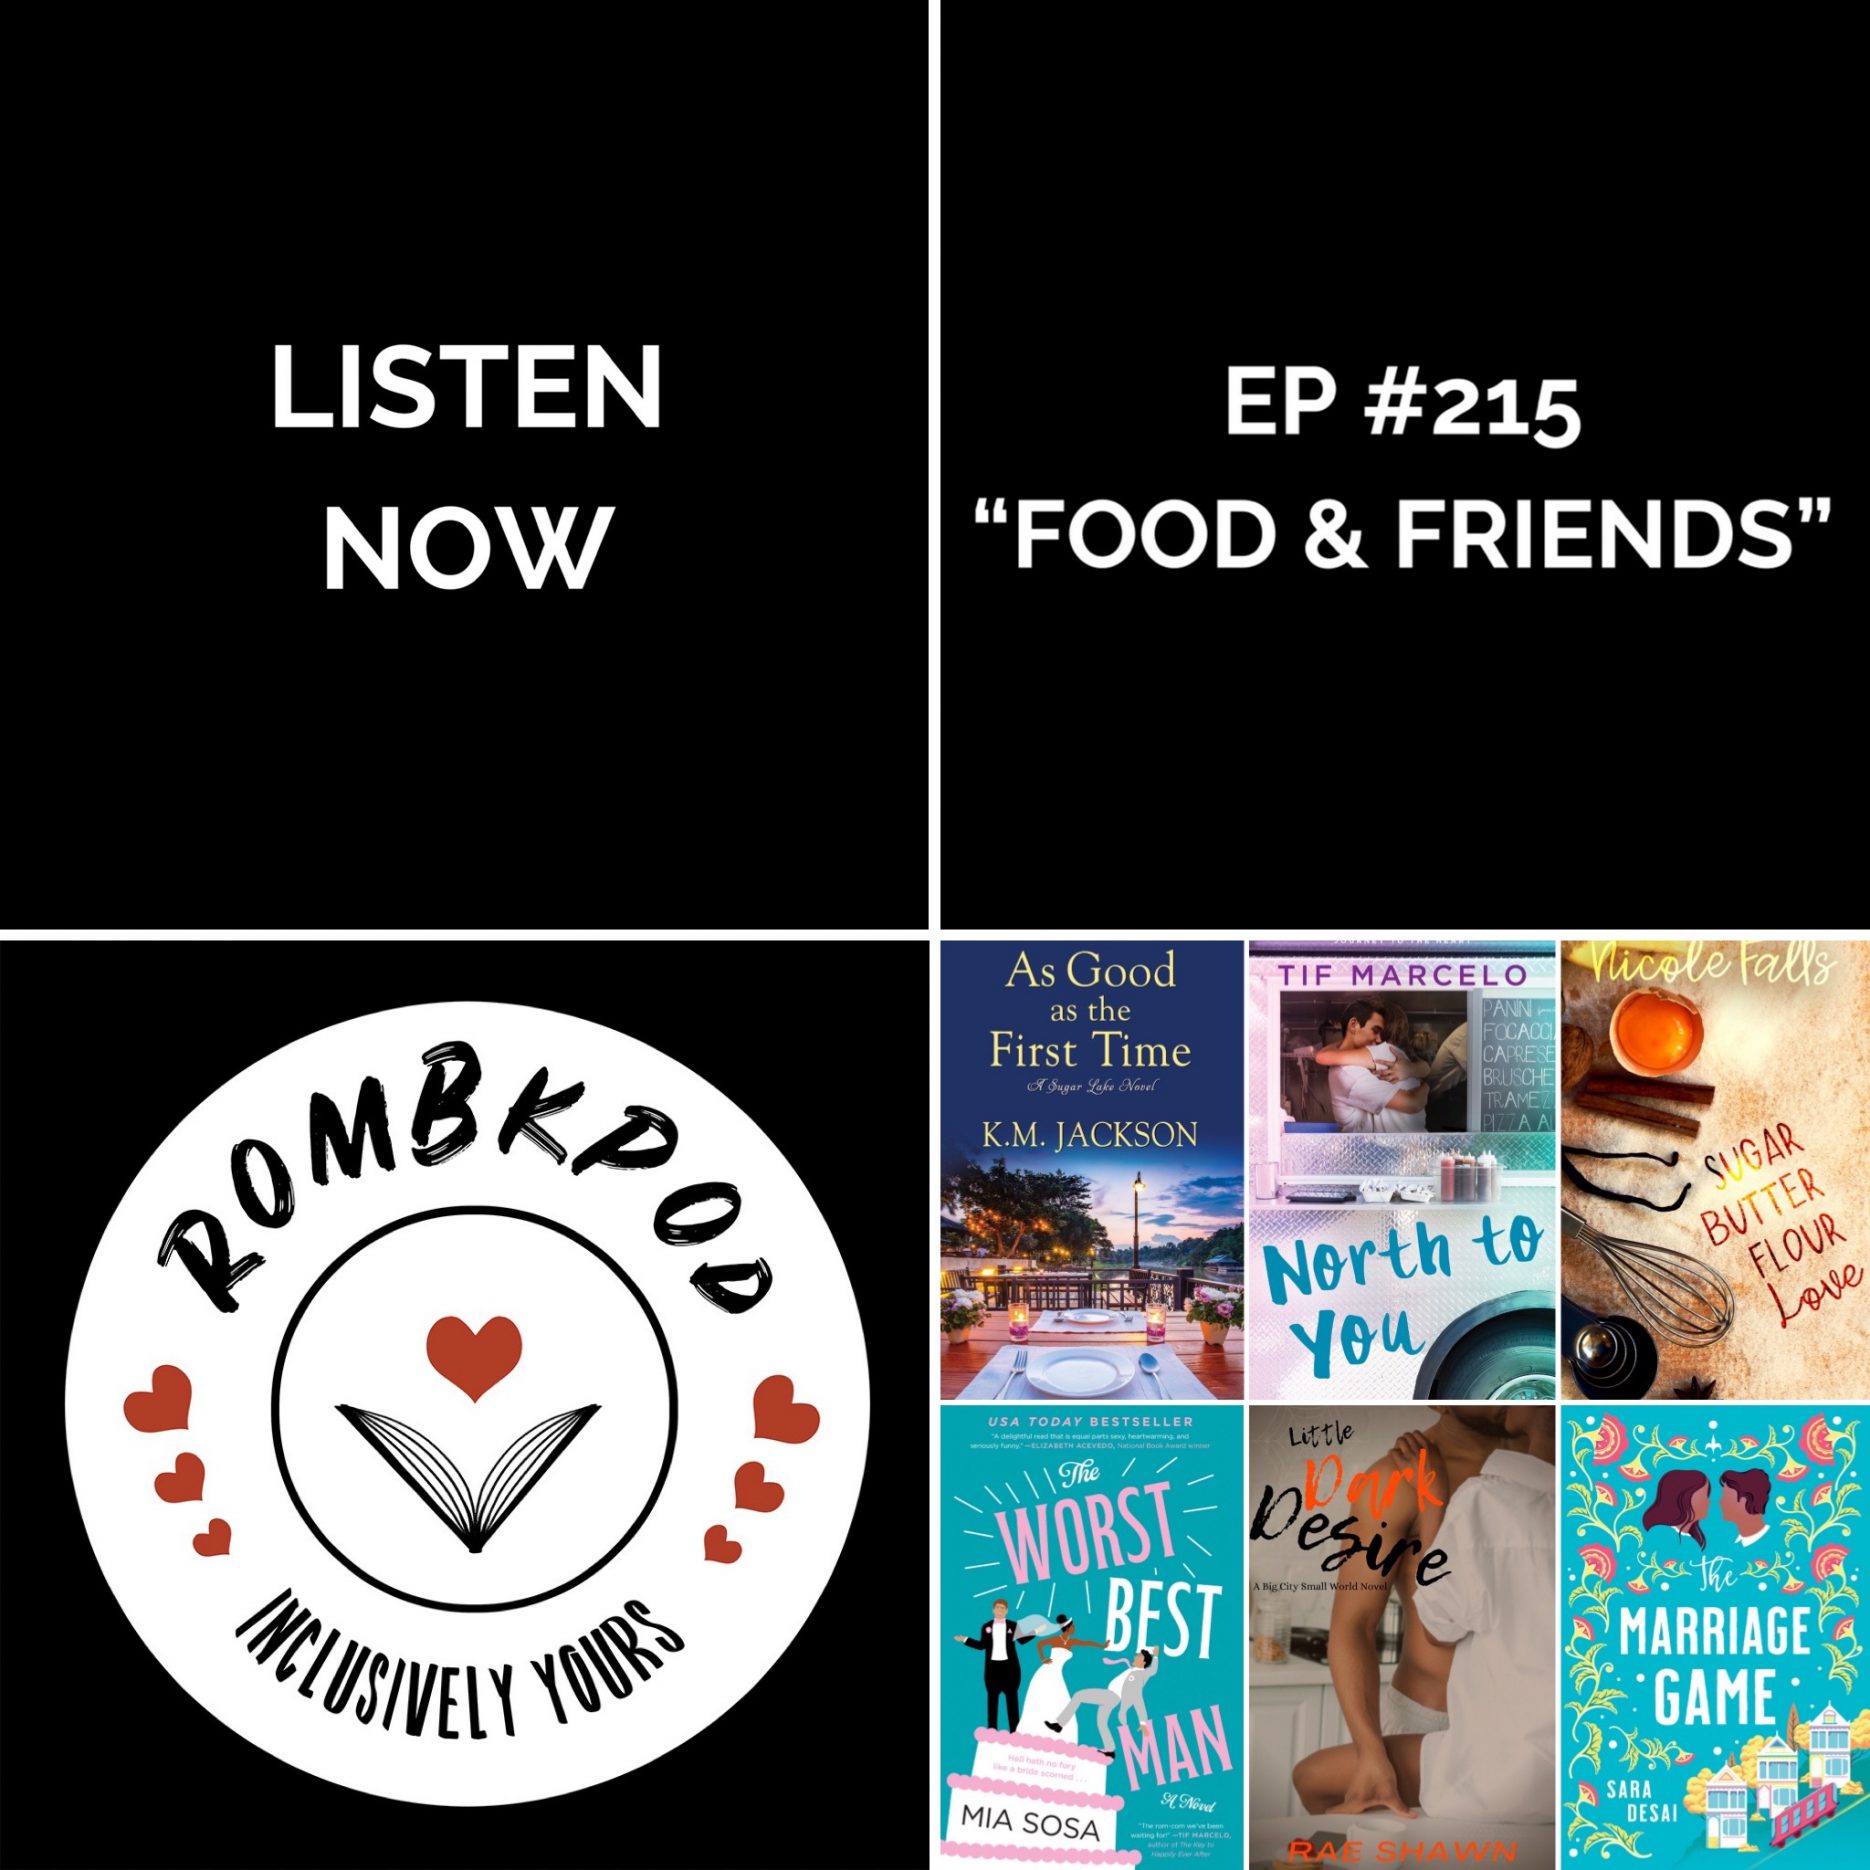 IMAGE: lower left corner, RomBkPod heart logo; lower right corner, ep #215 book cover collage; IMAGE TEXT: Listen Now, ep #215 "Food & Friends"